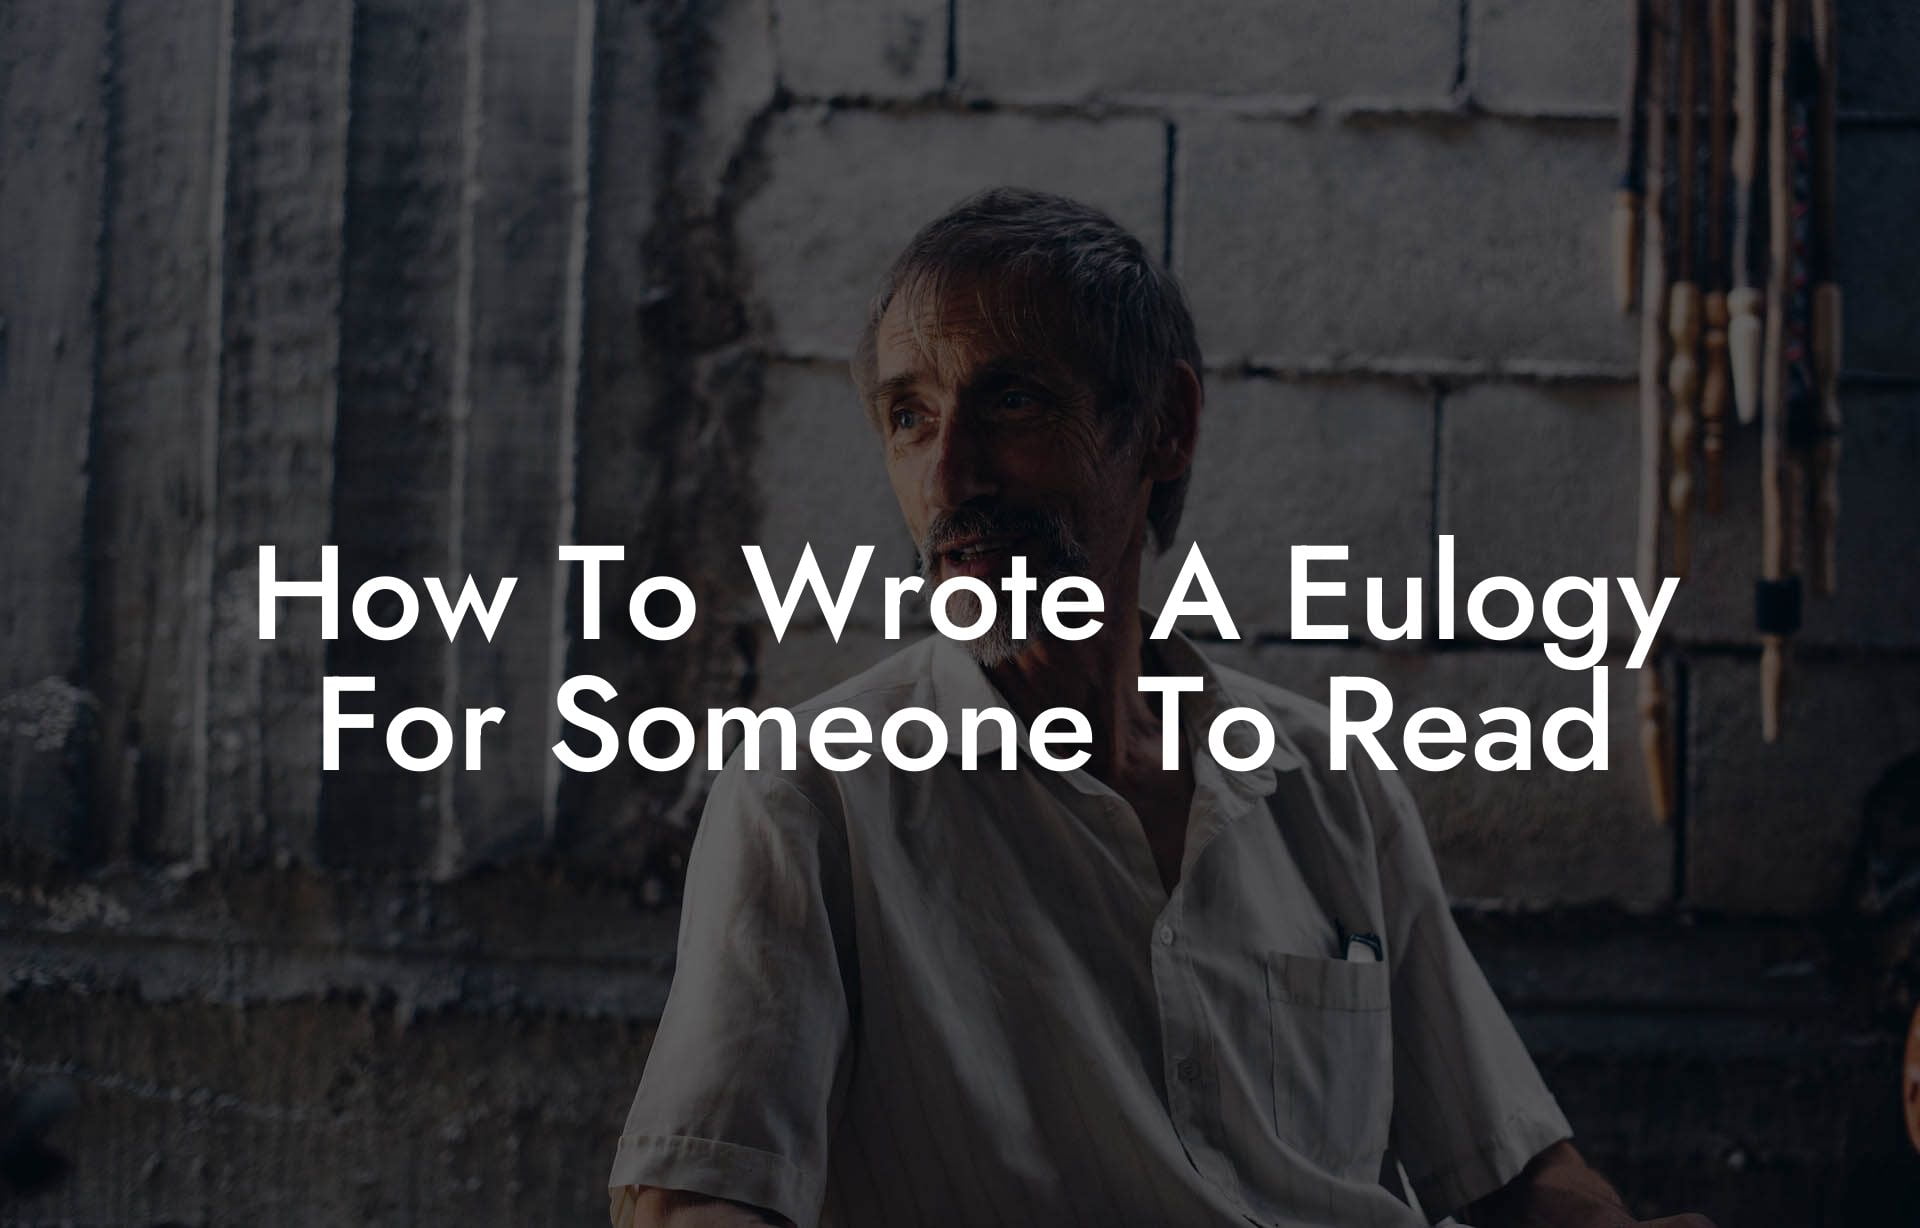 How To Wrote A Eulogy For Someone To Read